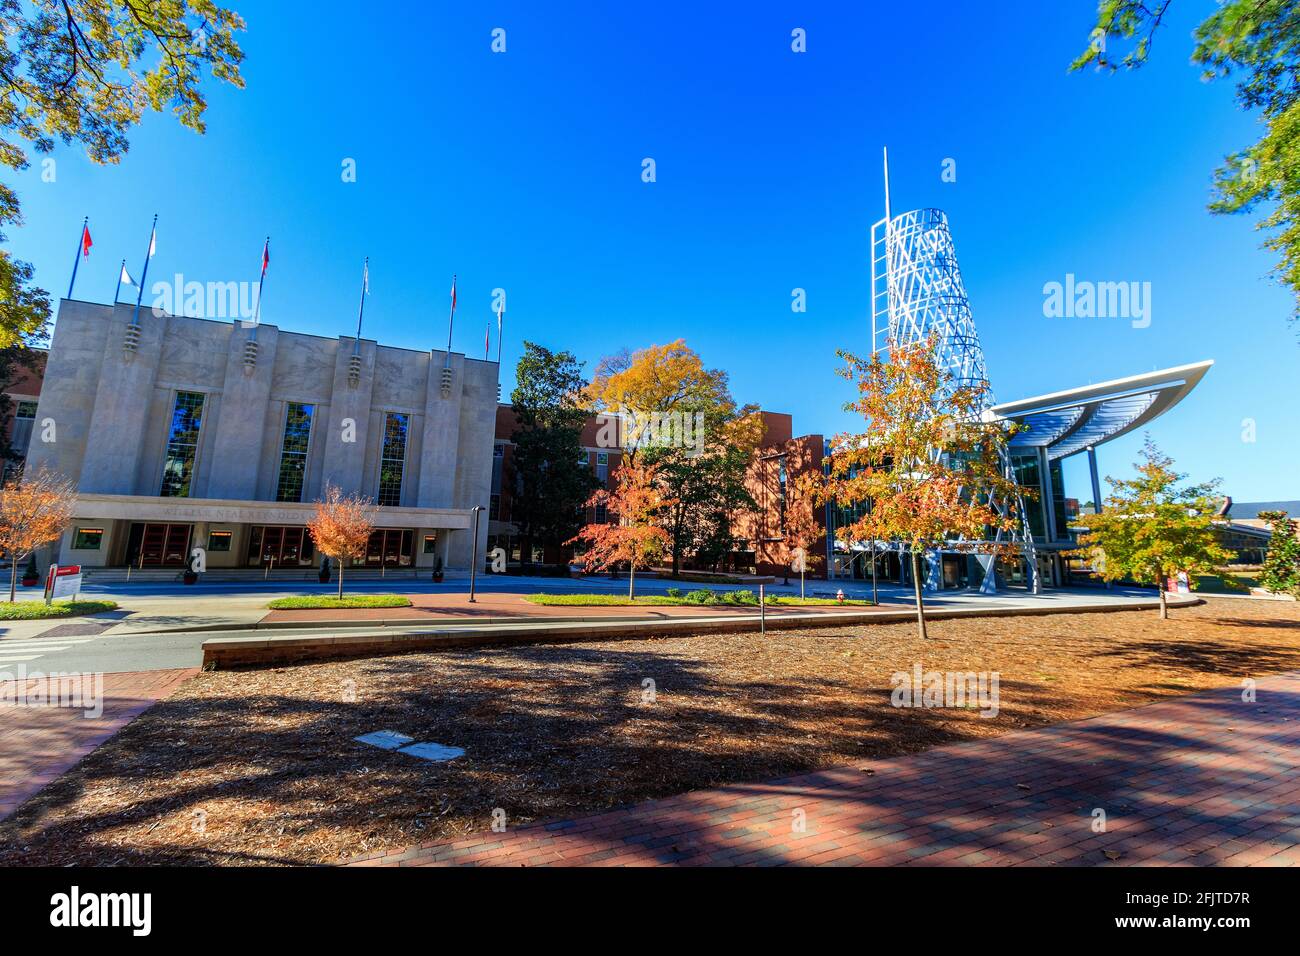 RALEIGH, NC, USA - NOVEMBER 24: Talley Student Union and Reynolds Coliseum on November 24, 2017 at North Carolina State University in Raleigh, North C Stock Photo